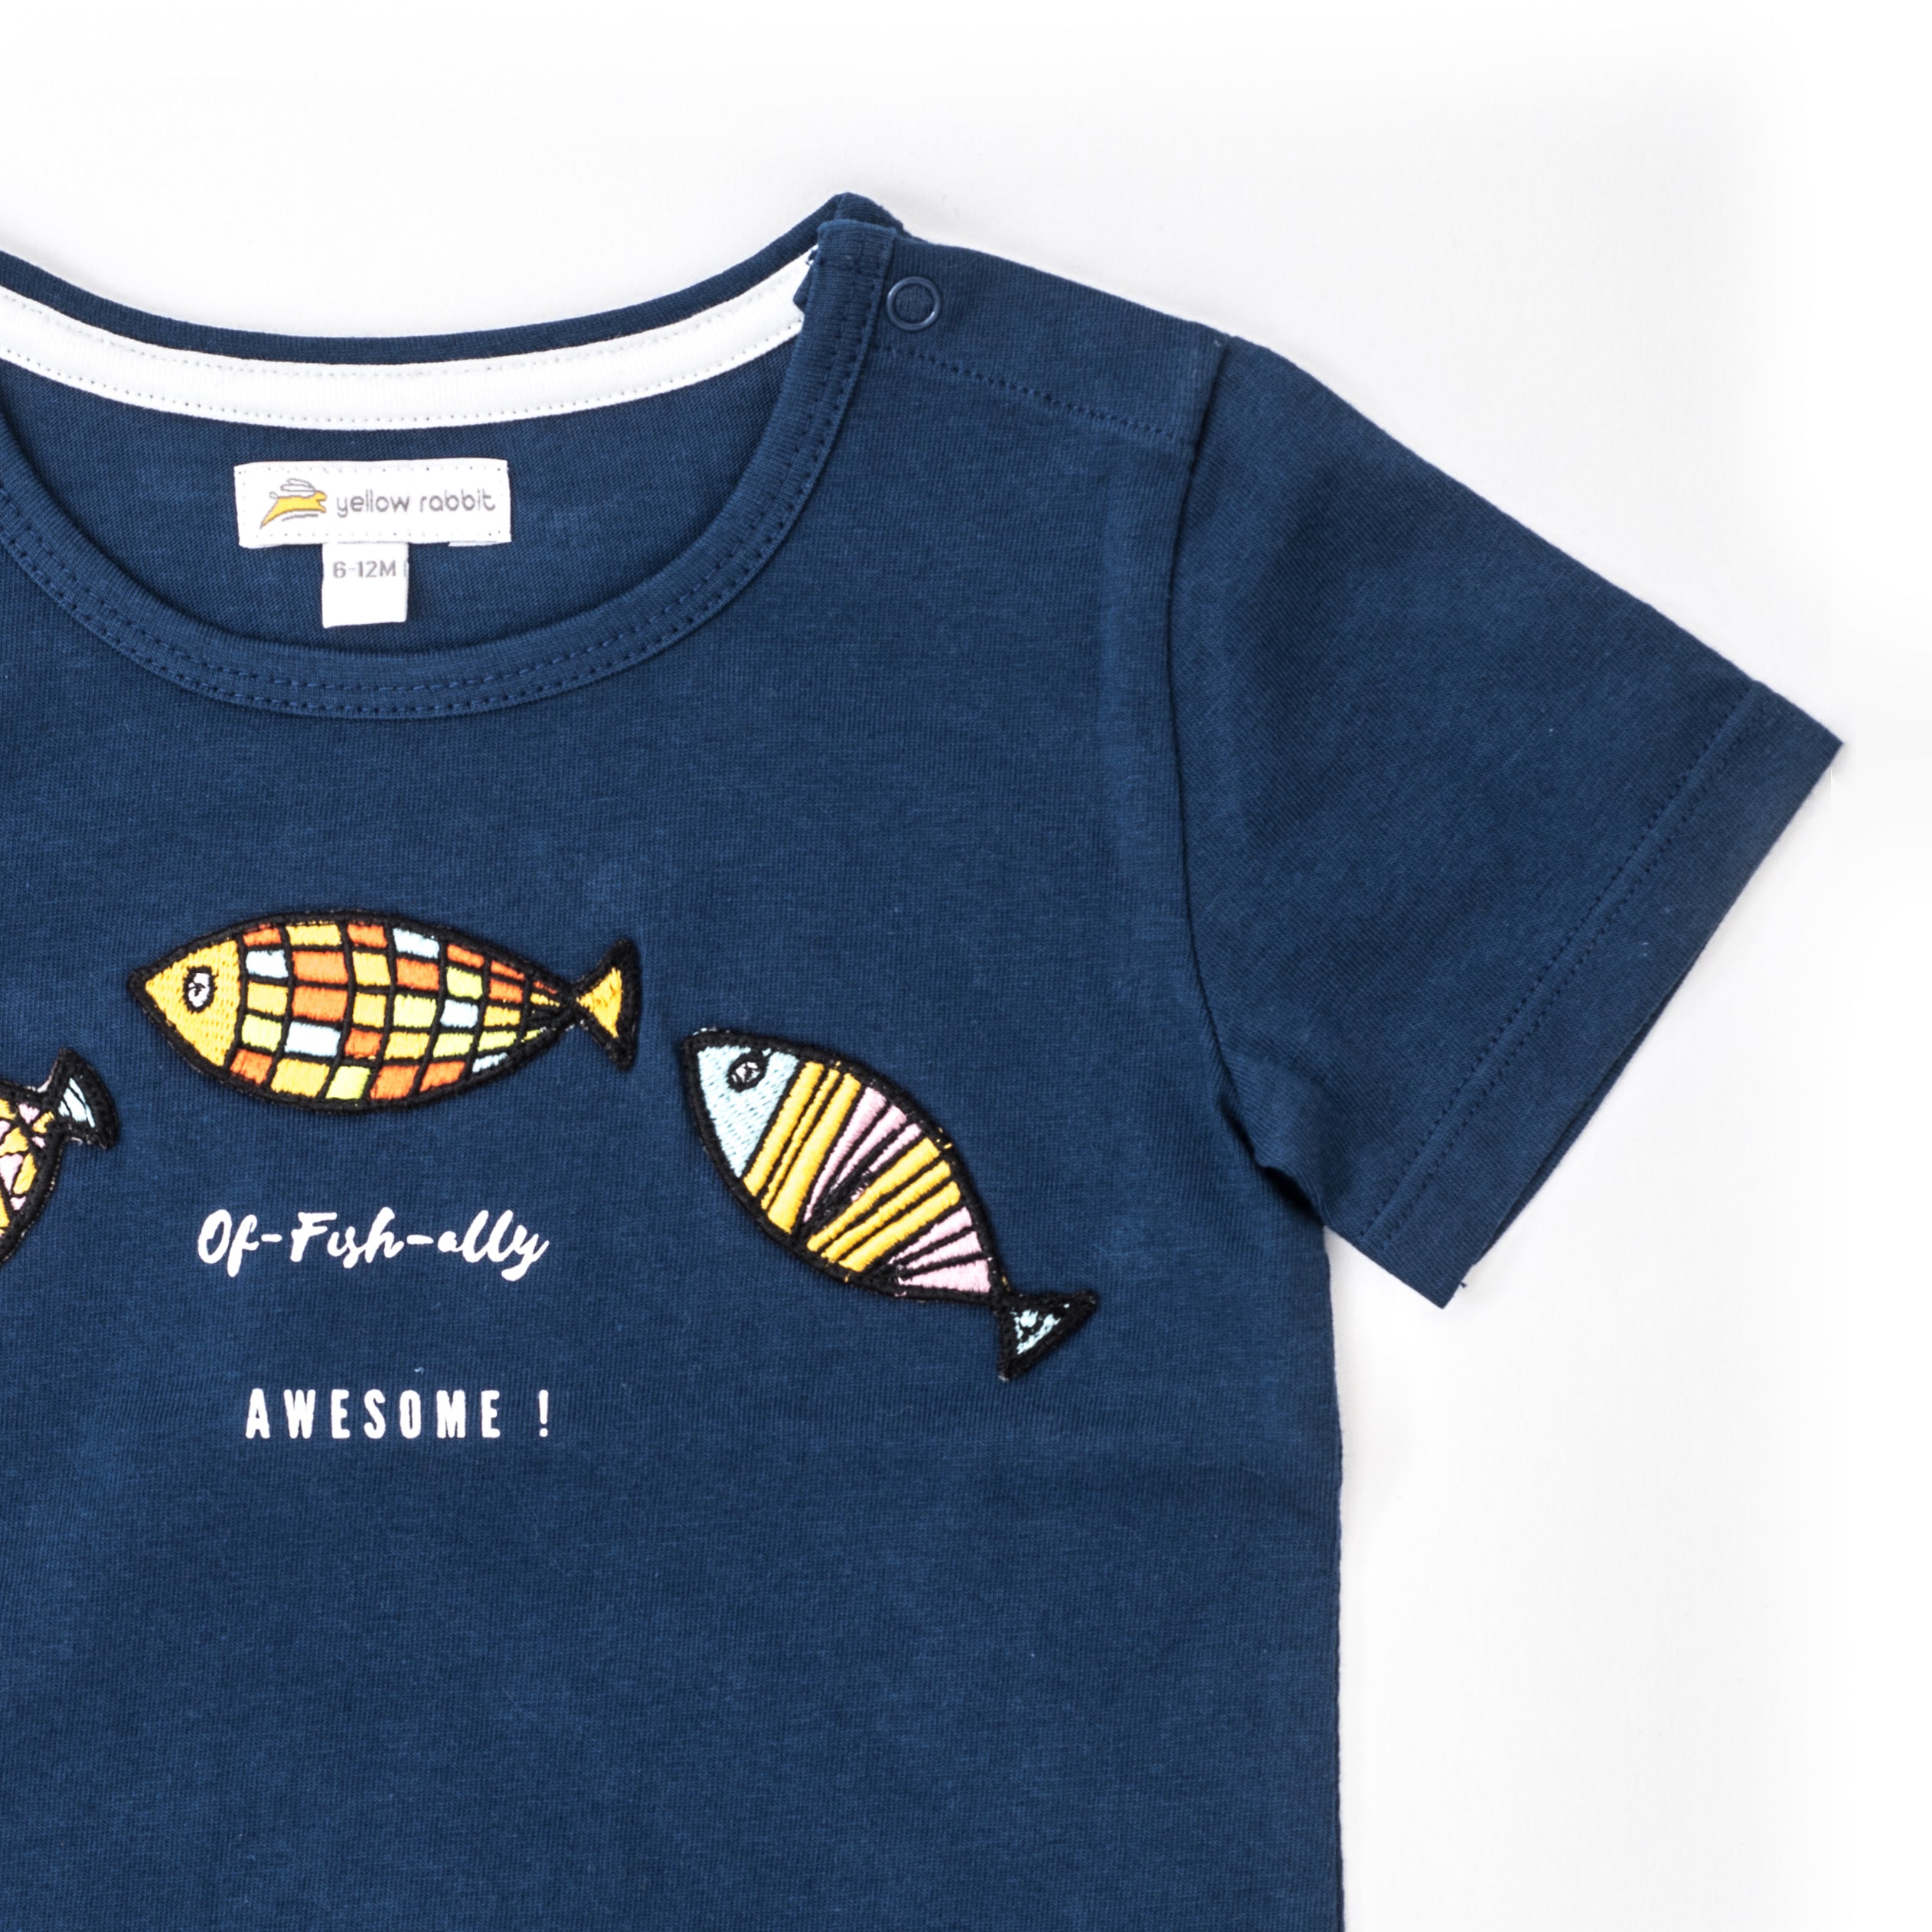 of-fish-ally awesome tshirt navy